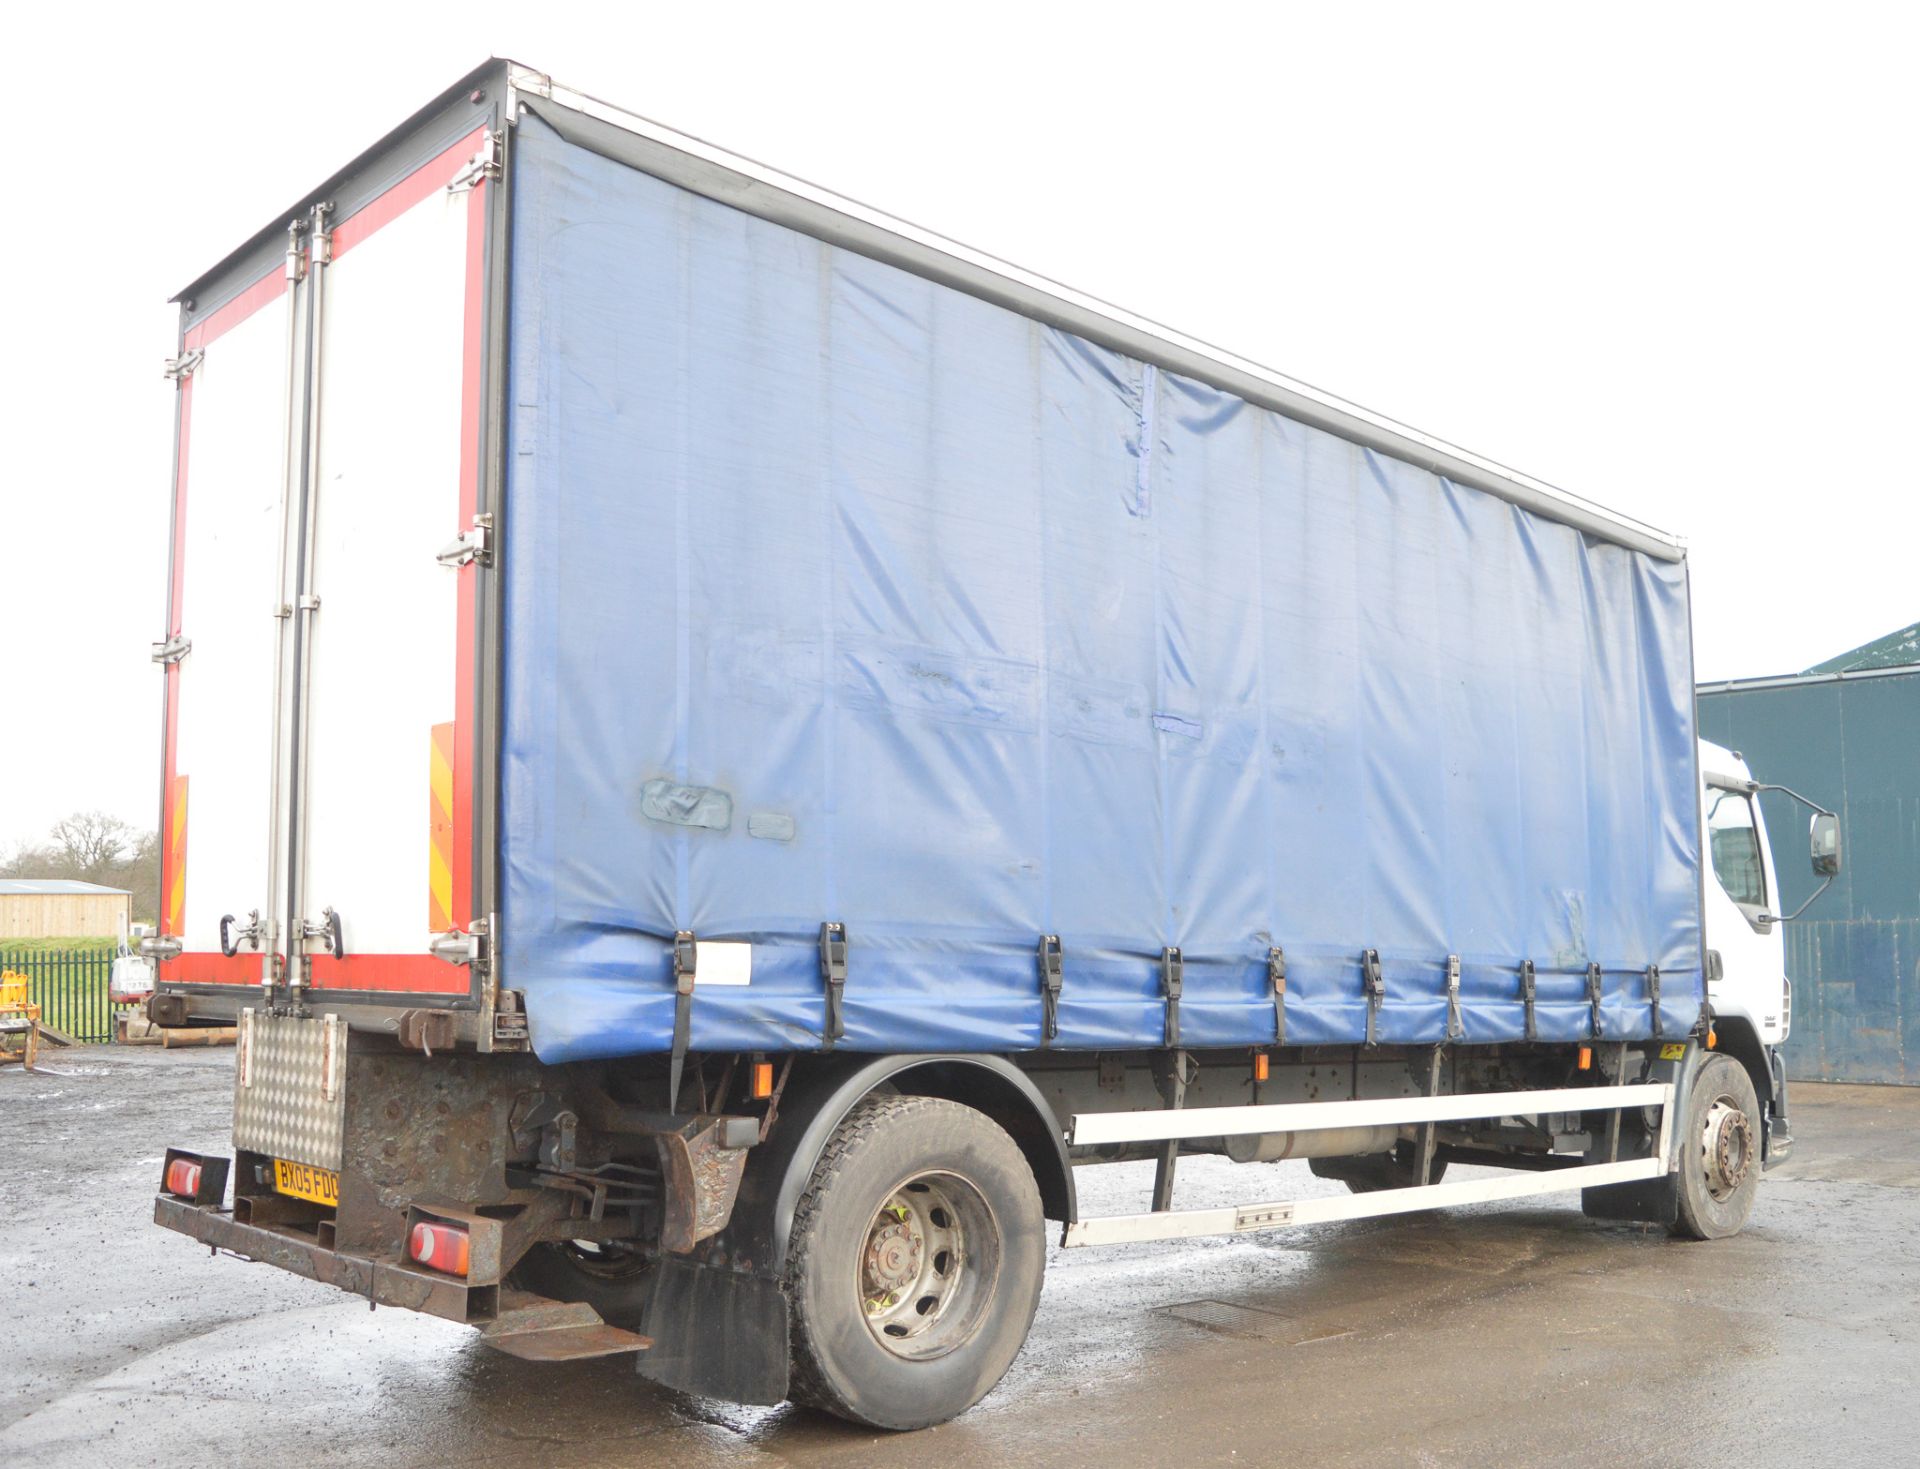 DAF 55-220 18 tonne curtain side flat bed lorry Registration Number: BX05 FDO Date of - Image 4 of 9